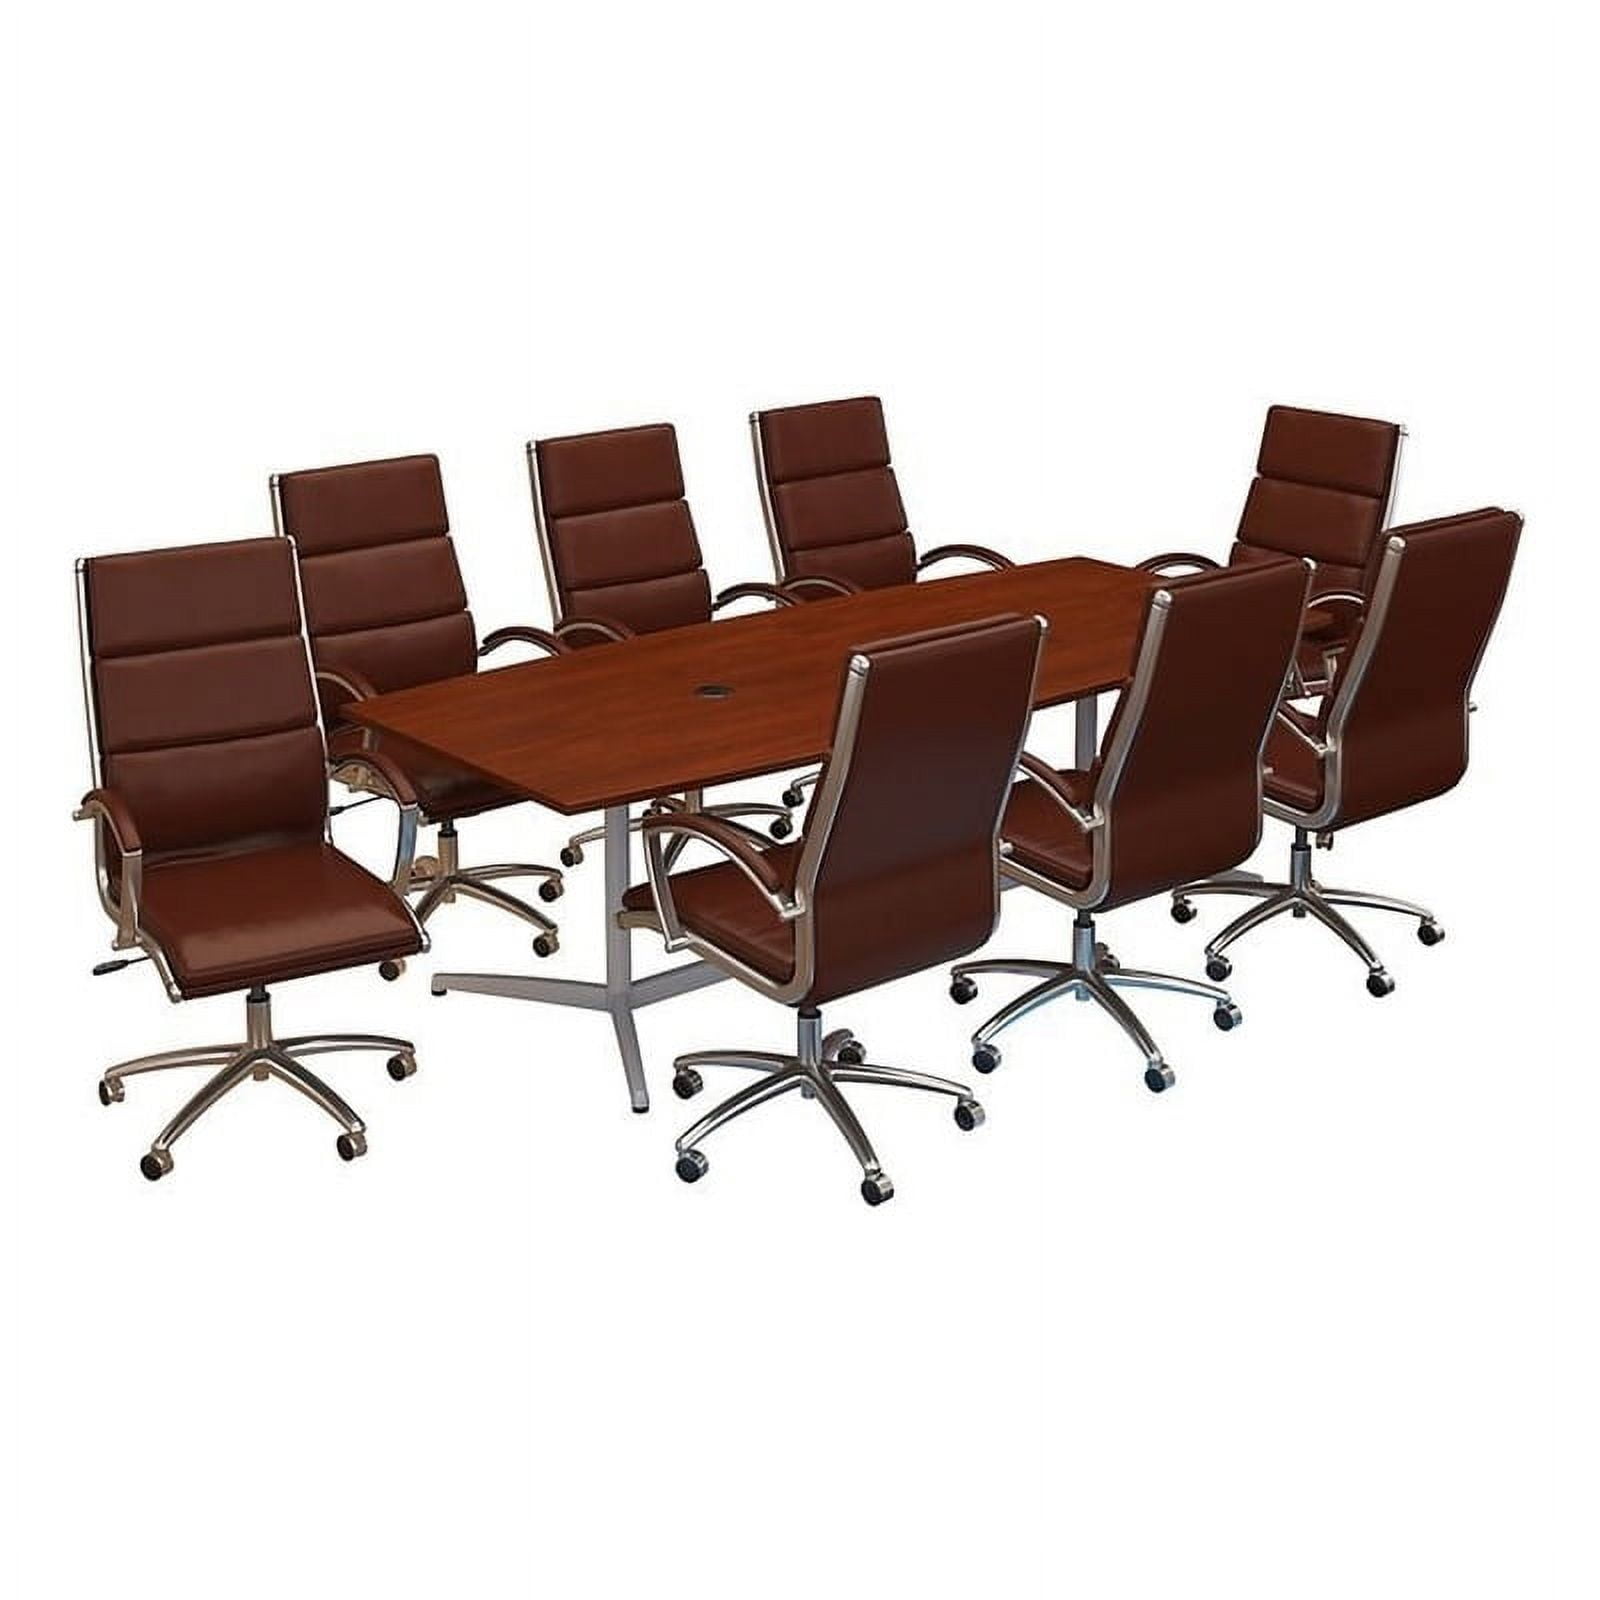 CTB001HC 96 x 42 in. Boat Shaped Conference Table with Metal Base & High Back Office Chairs - Hansen Cherry, Set of 8 -  Bush Business Furniture